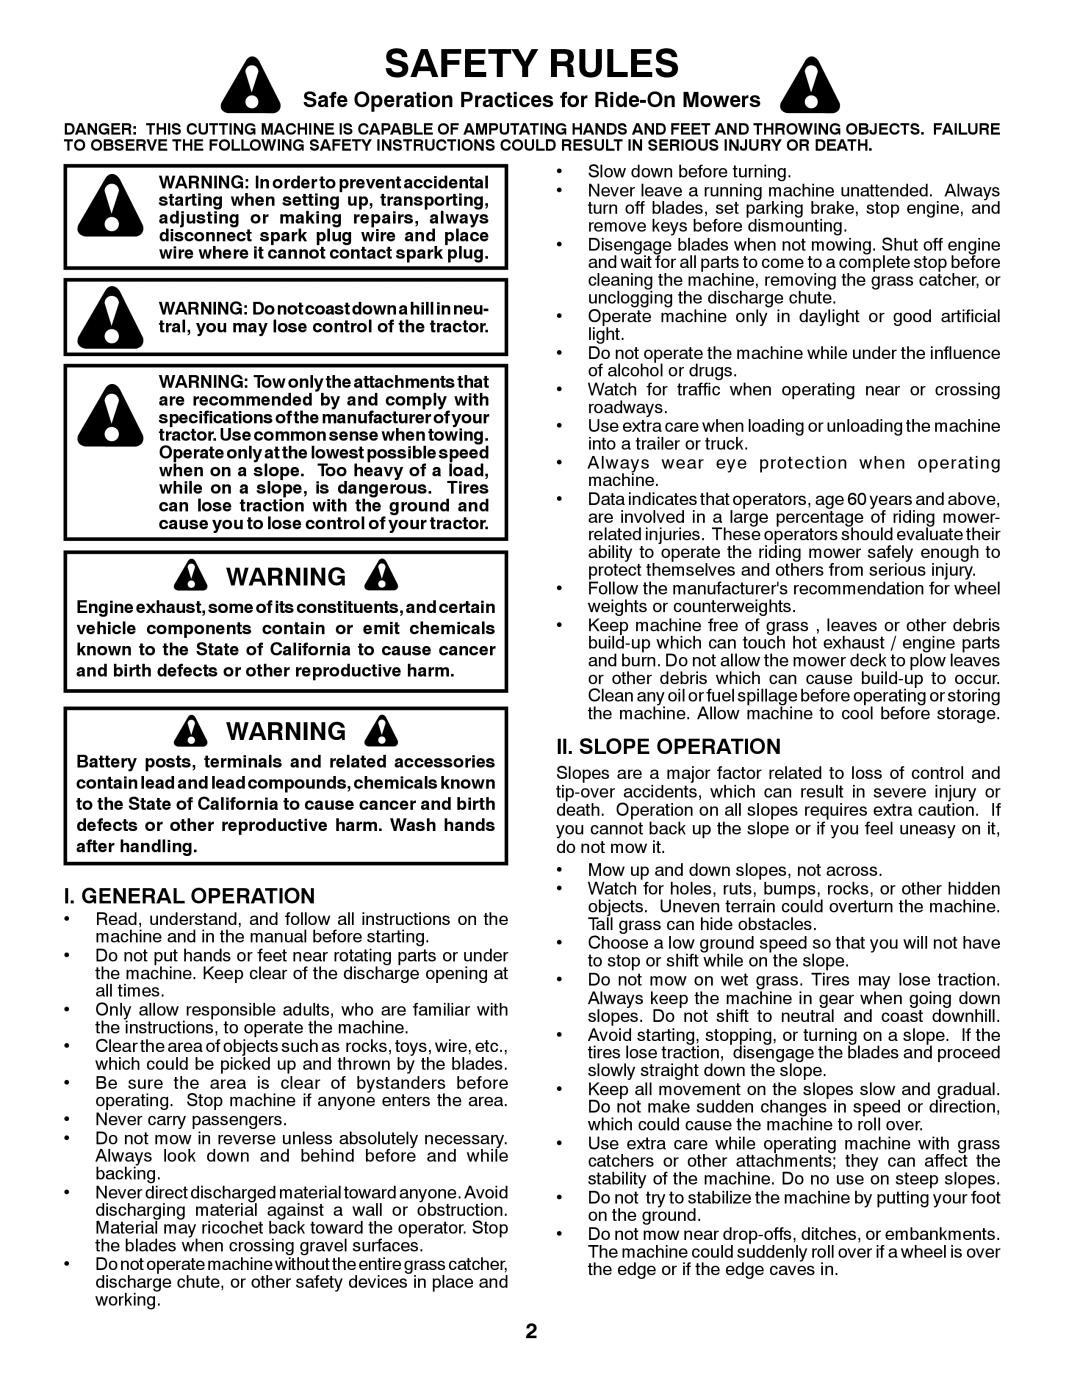 Poulan 96042011300 Safety Rules, Safe Operation Practices for Ride-On Mowers, I. General Operation, Ii. Slope Operation 